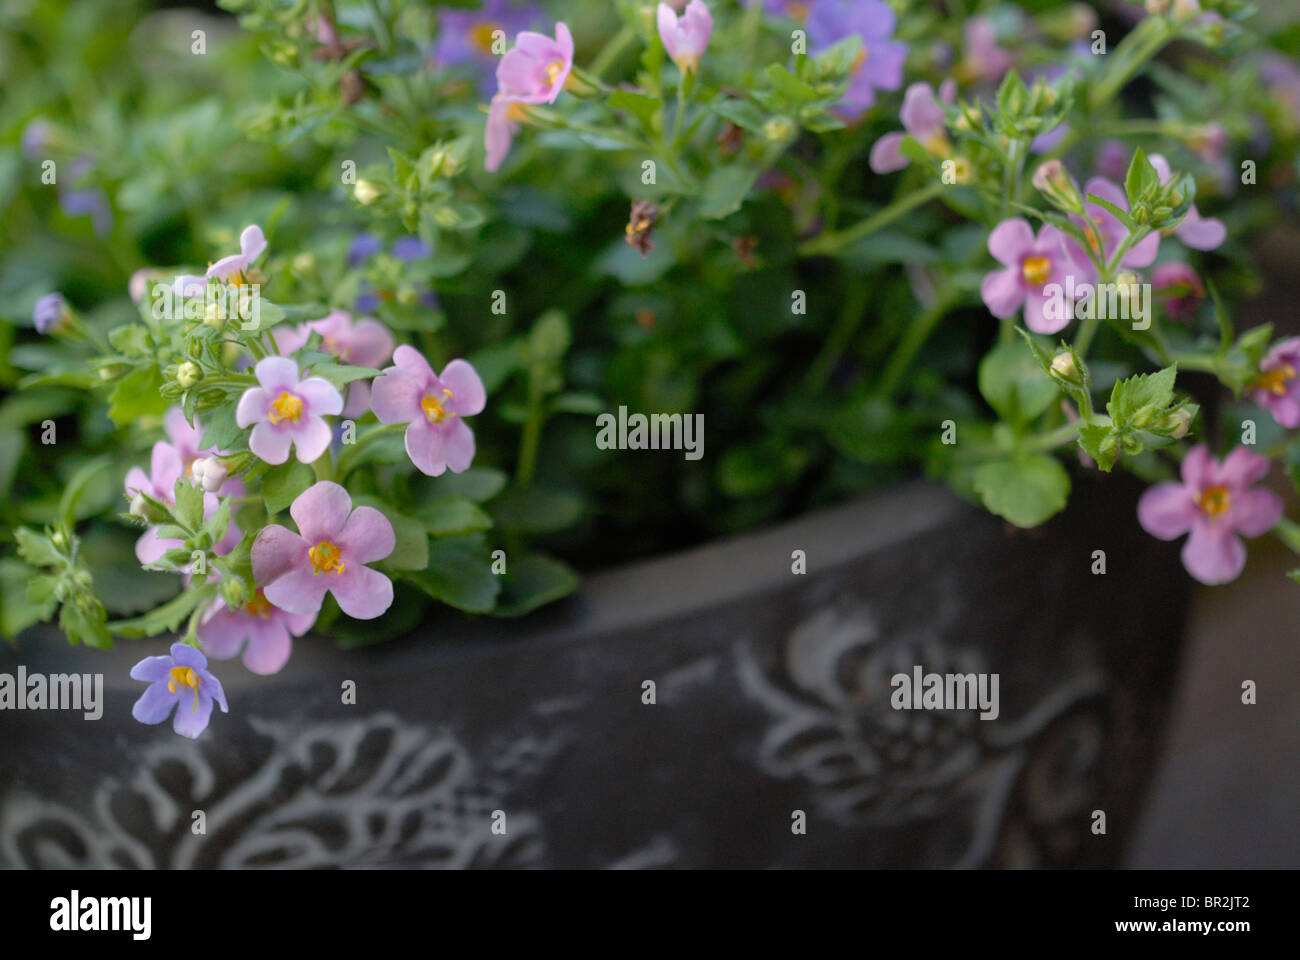 Bacopa (sutera) cordata growing in container Stock Photo